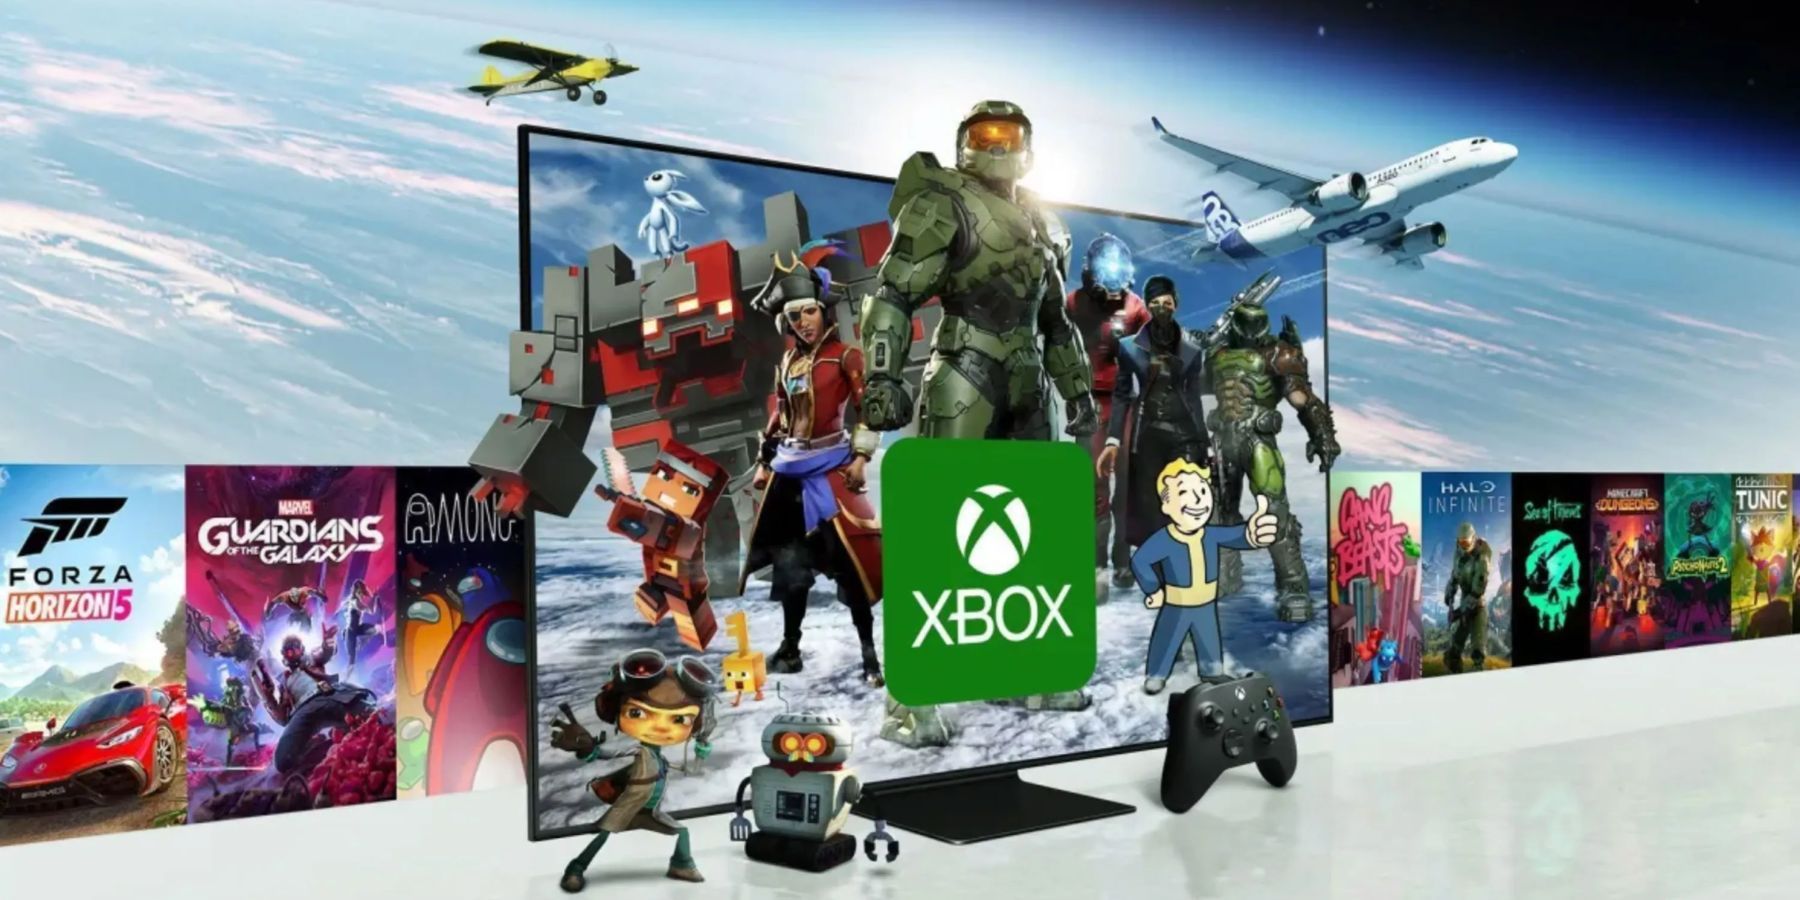 Bandwidth: Boosteroid lands in the US, and Xbox expands even further